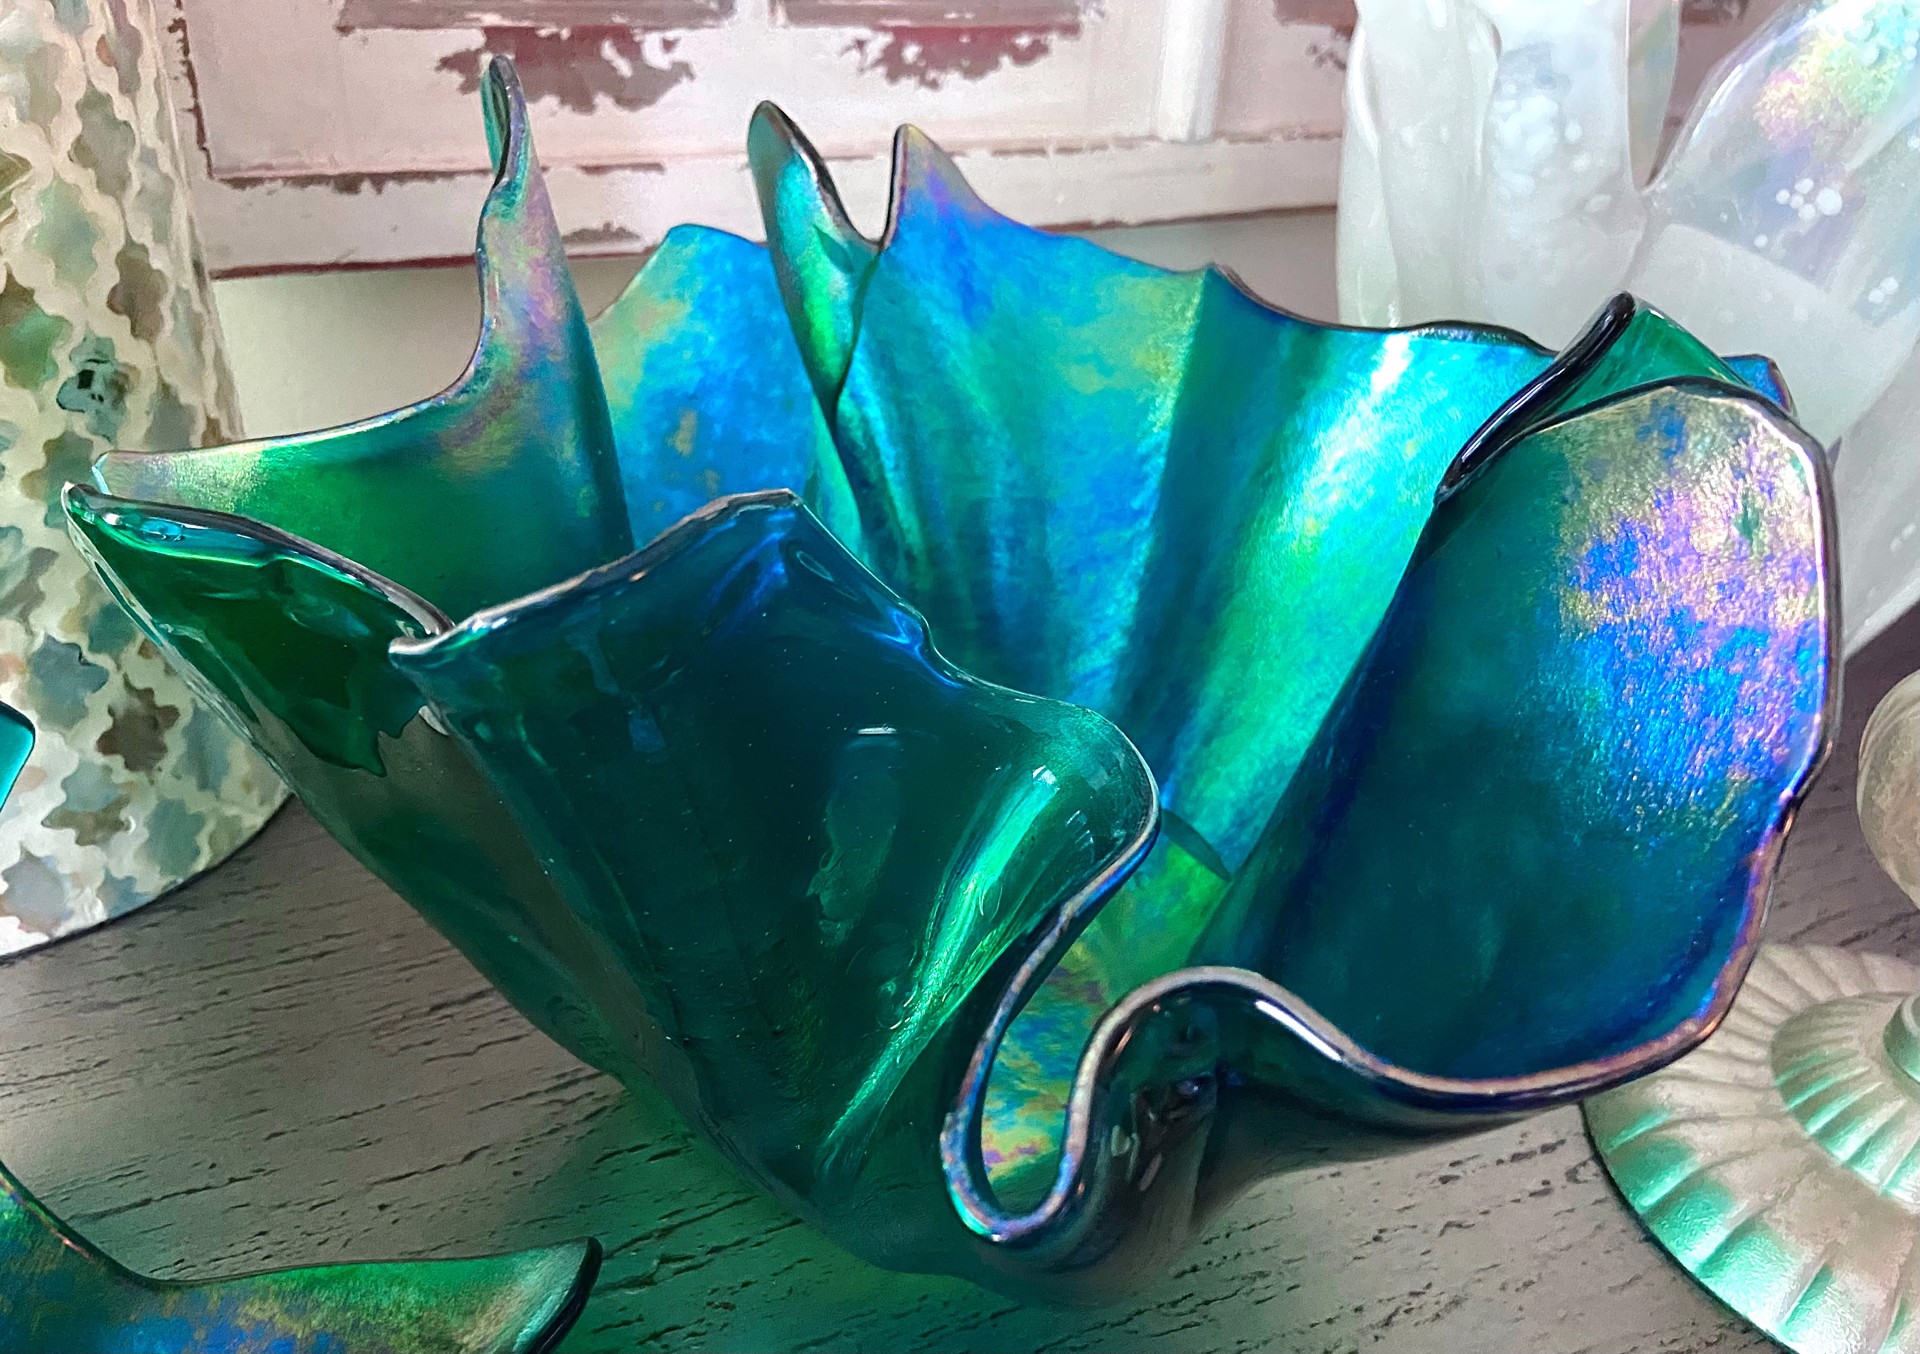 15" Commission Emerald Coast Sculptural Bowl by Leigh Francis